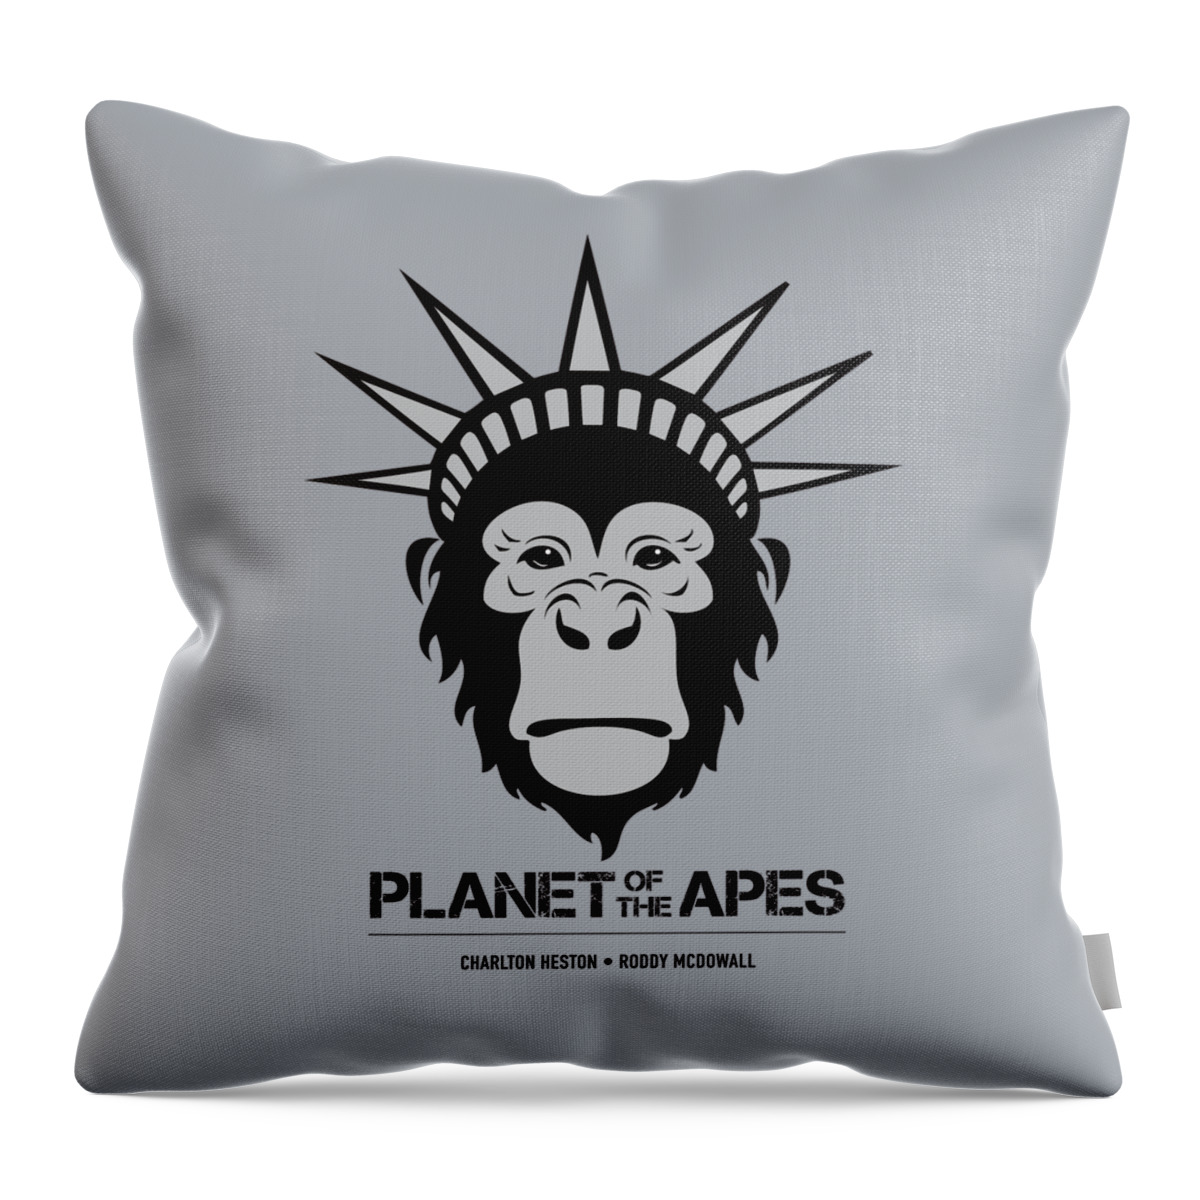 Planet Of The Apes Throw Pillow featuring the digital art Planet of the Apes - Alternative Movie Poster by Movie Poster Boy